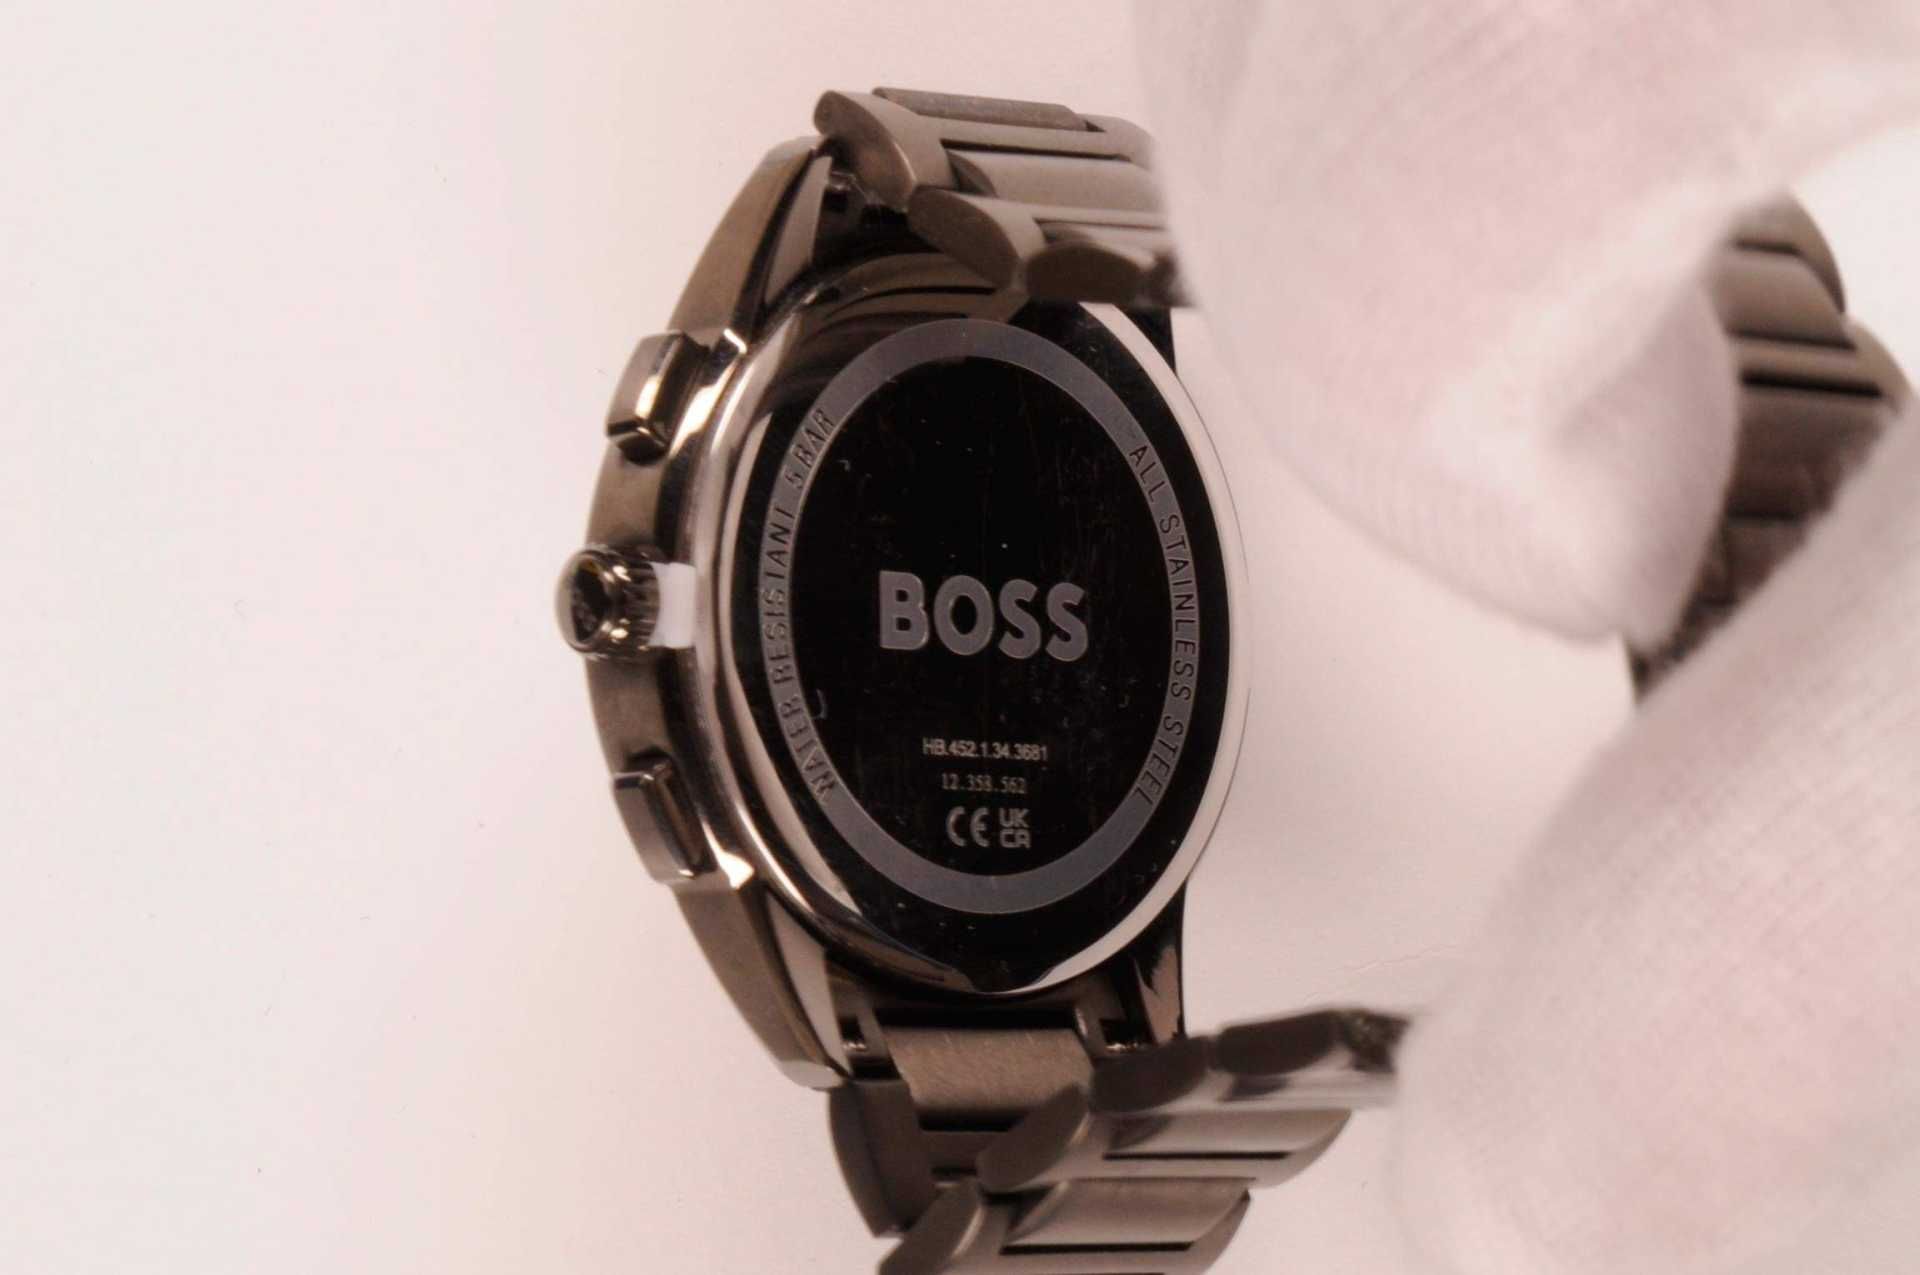 Hugo Boss chronograph 1513929 men's wristwatch. Ca. 43 mm, grey, mineral glass, black analogue dial, - Image 5 of 5